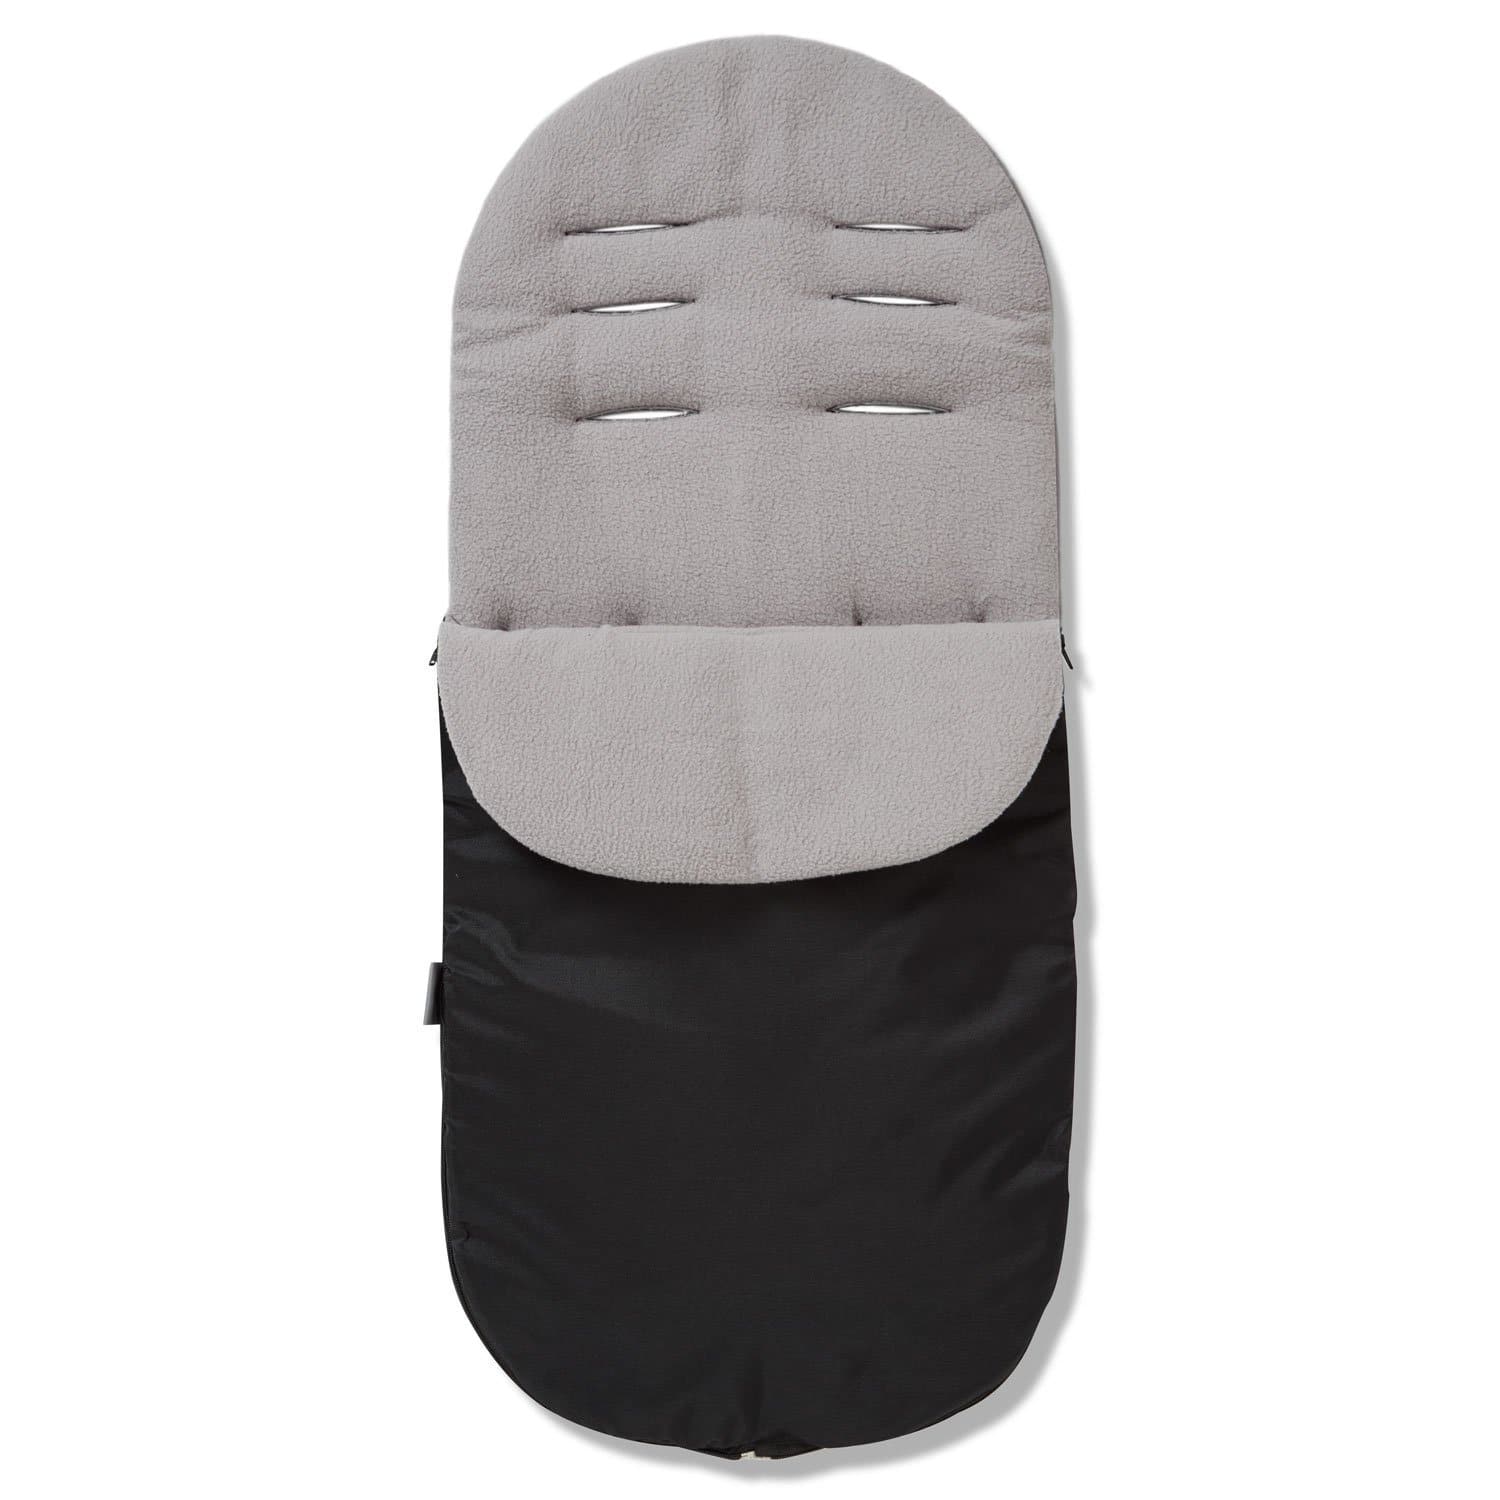 Footmuff / Cosy Toes Compatible with Hybrid - Grey / Fits All Models | For Your Little One